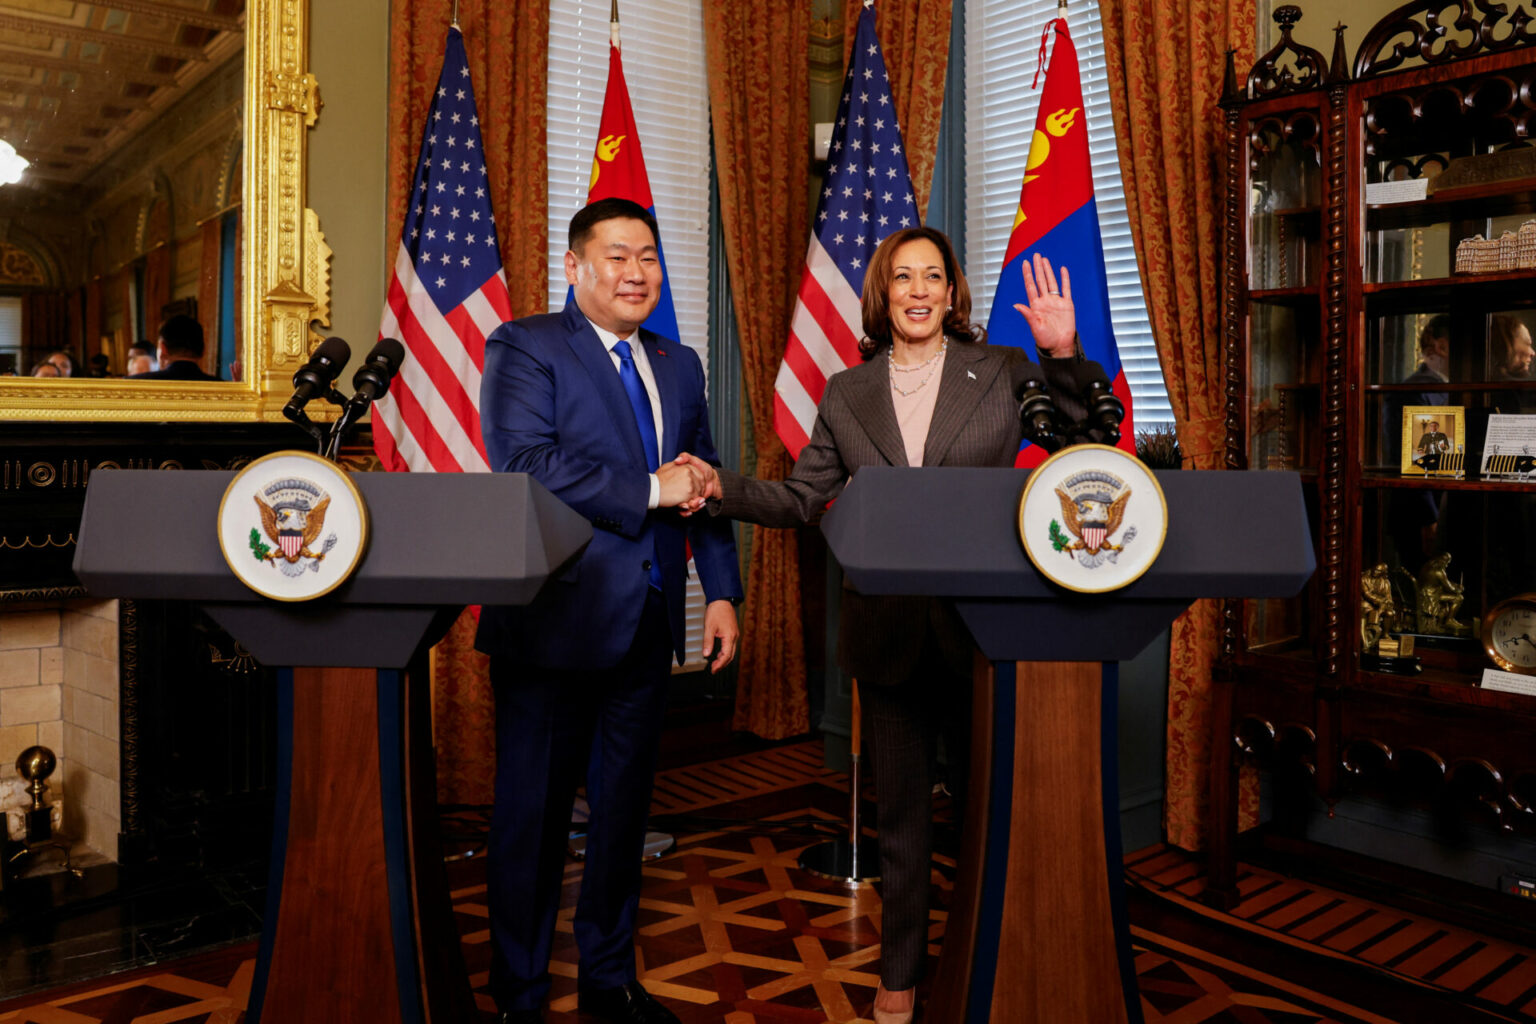 U.S. Vice President Kamala Harris meets with Mongolia's Prime Minister Oyun-Erdene Luvsannamsrai at her ceremonial office, in the Eisenhower Executive Office Building, on the White House campus in Washington, U.S., August 2, 2024. REUTERS/Kevin Wurm